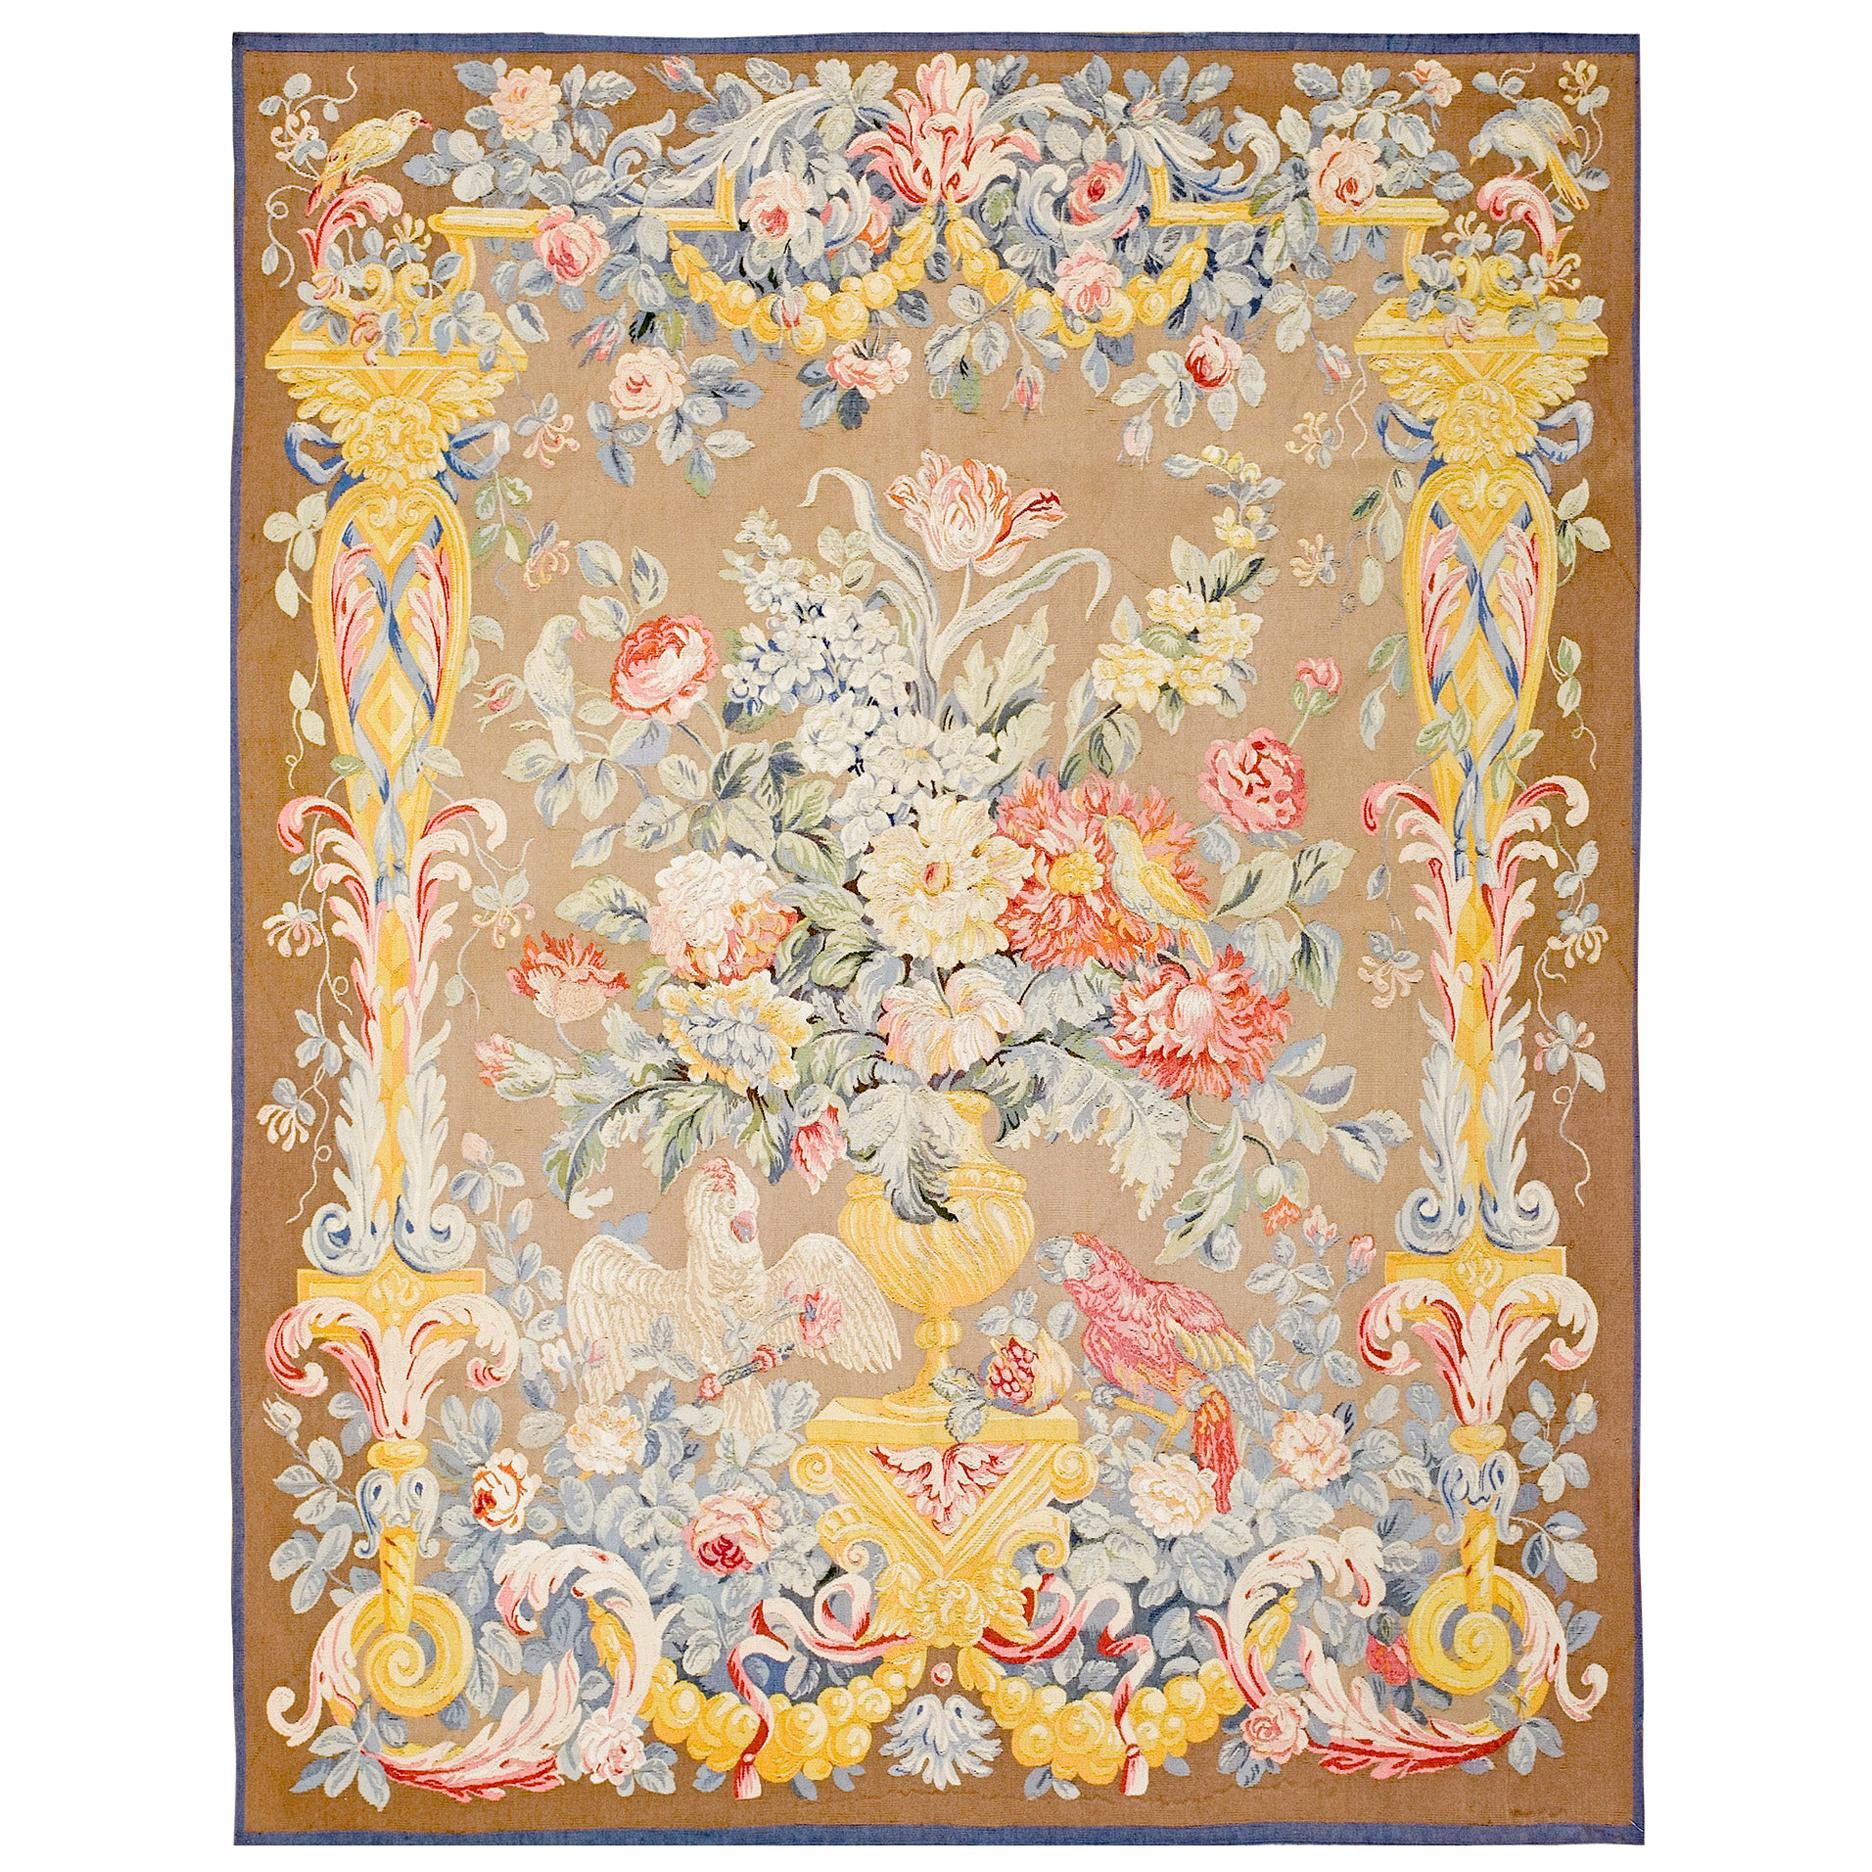 Late 19th Century French Tapestry ( 5'2" x 6'9" - 157 x 205 cm )